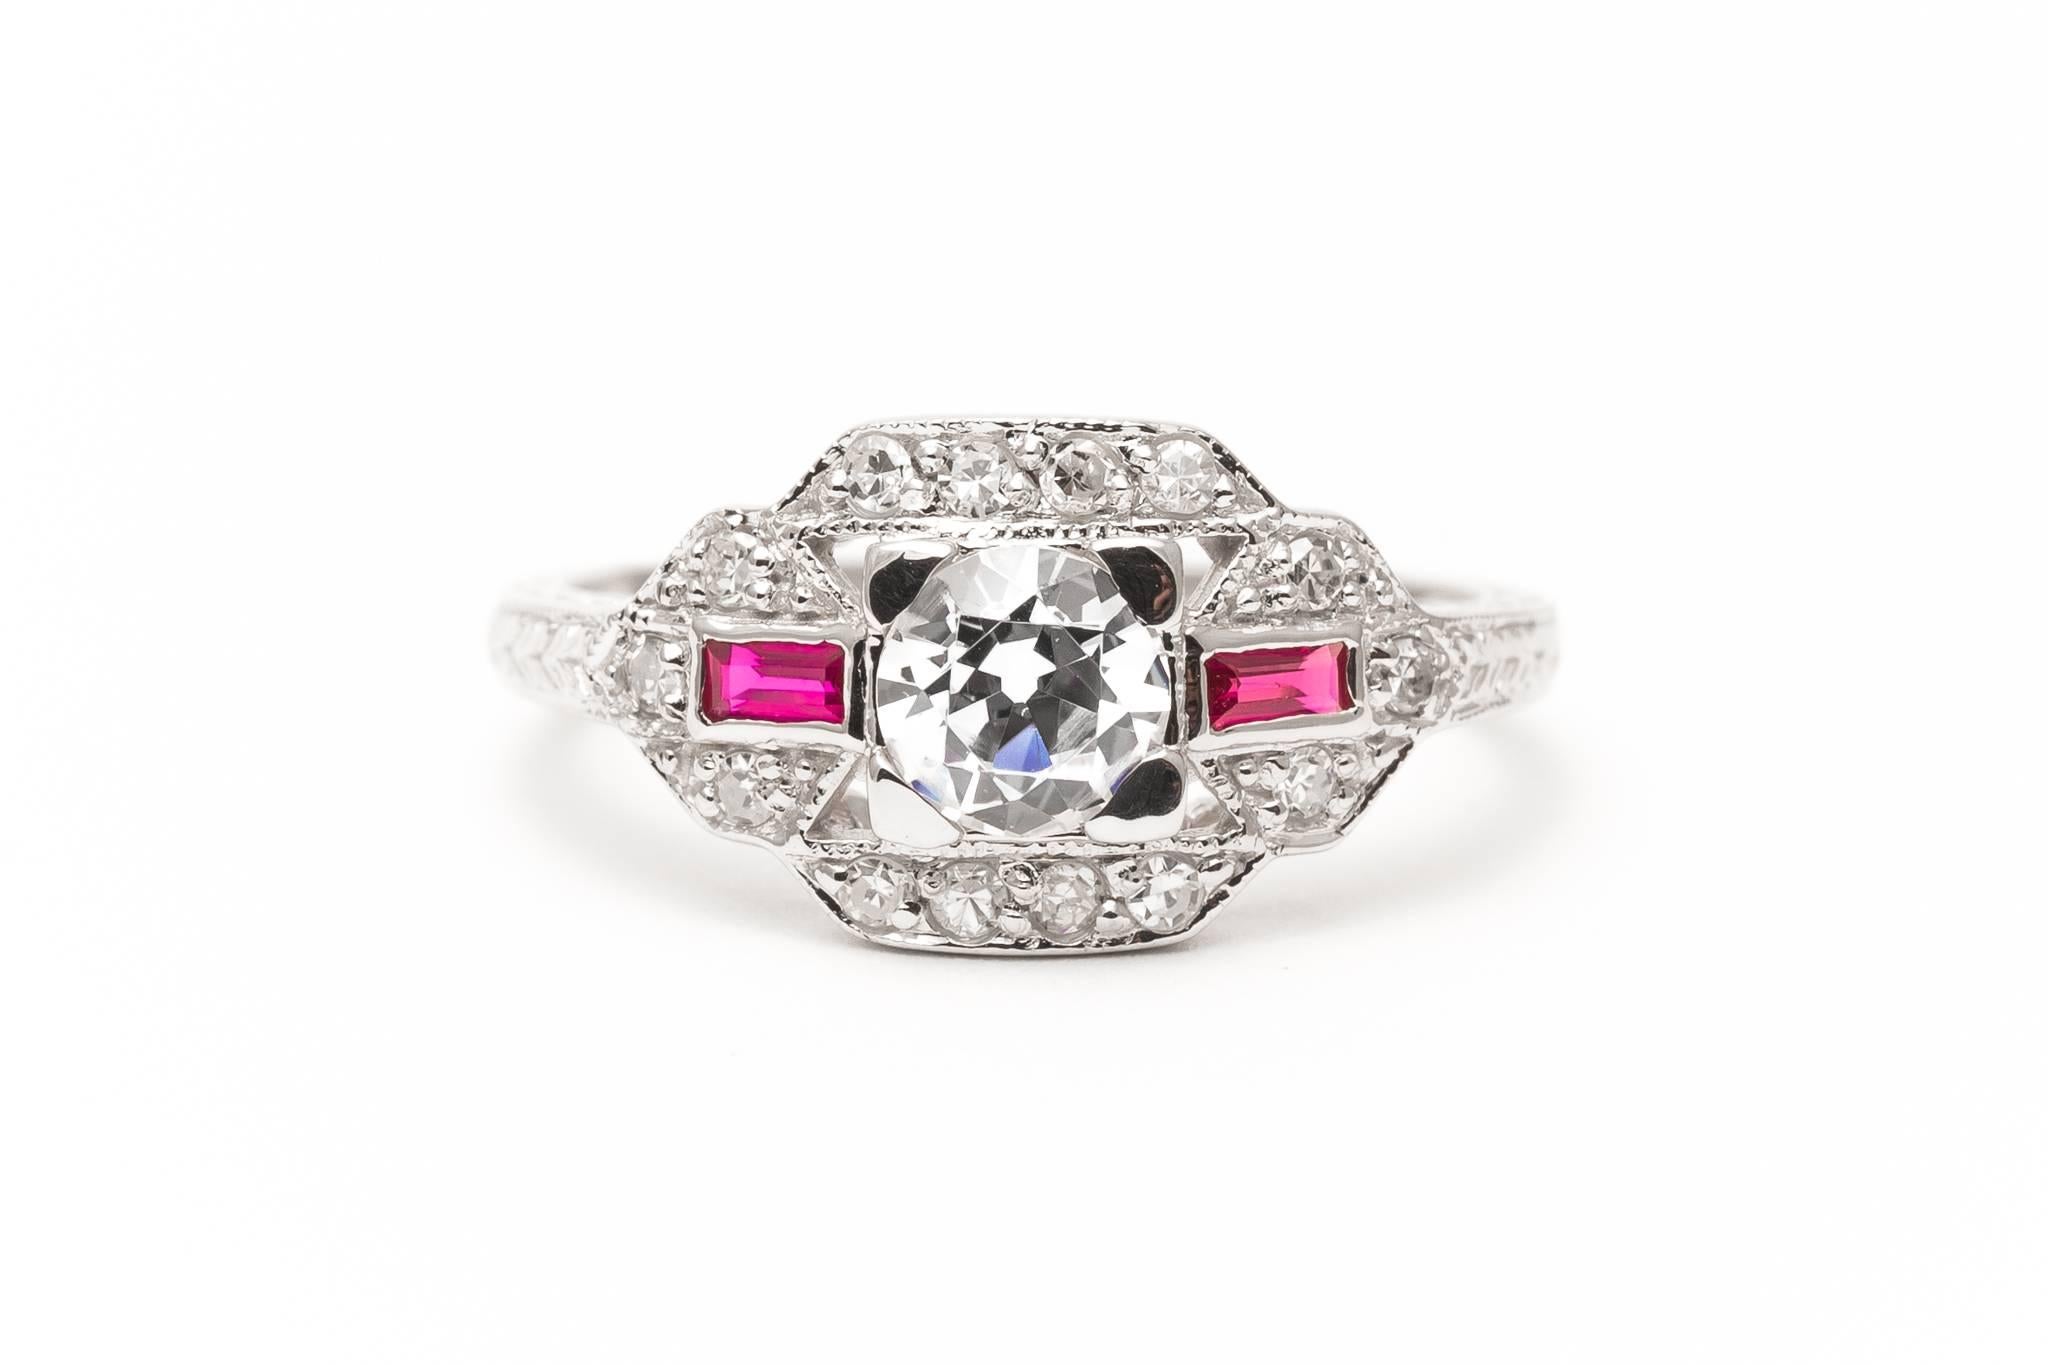 A beautiful hand engraved diamond and ruby ring in 14 karat white gold. Centered by a sparkling antique old European cut diamond of 0.42 carats this ring features antique single cut diamonds set throughout, as well as two baguette cut rubies adding